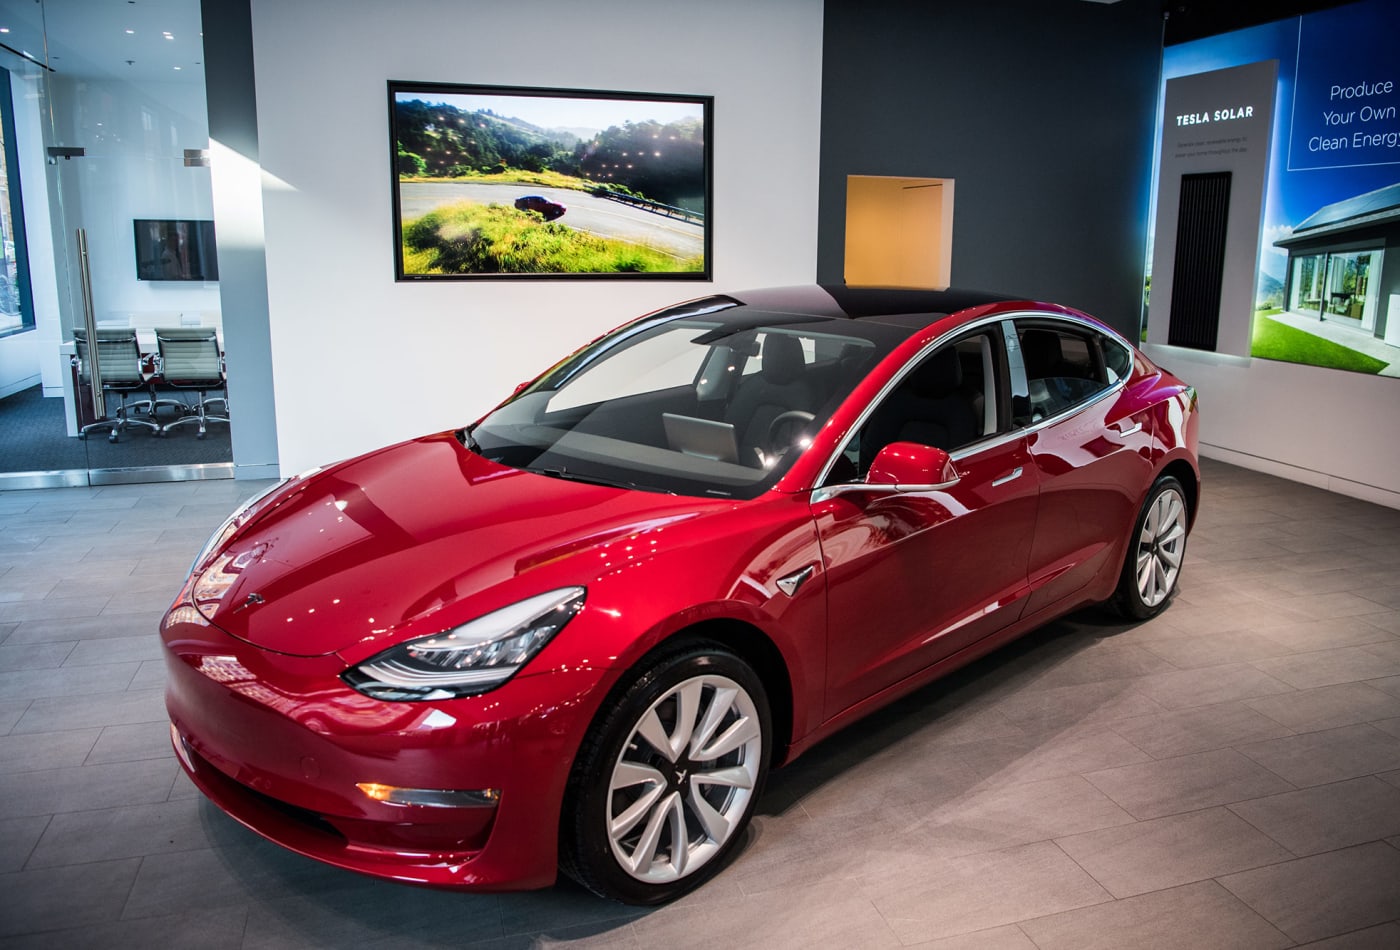 Tesla Model 3 Was Top Selling EV in the Netherlands for August 2020